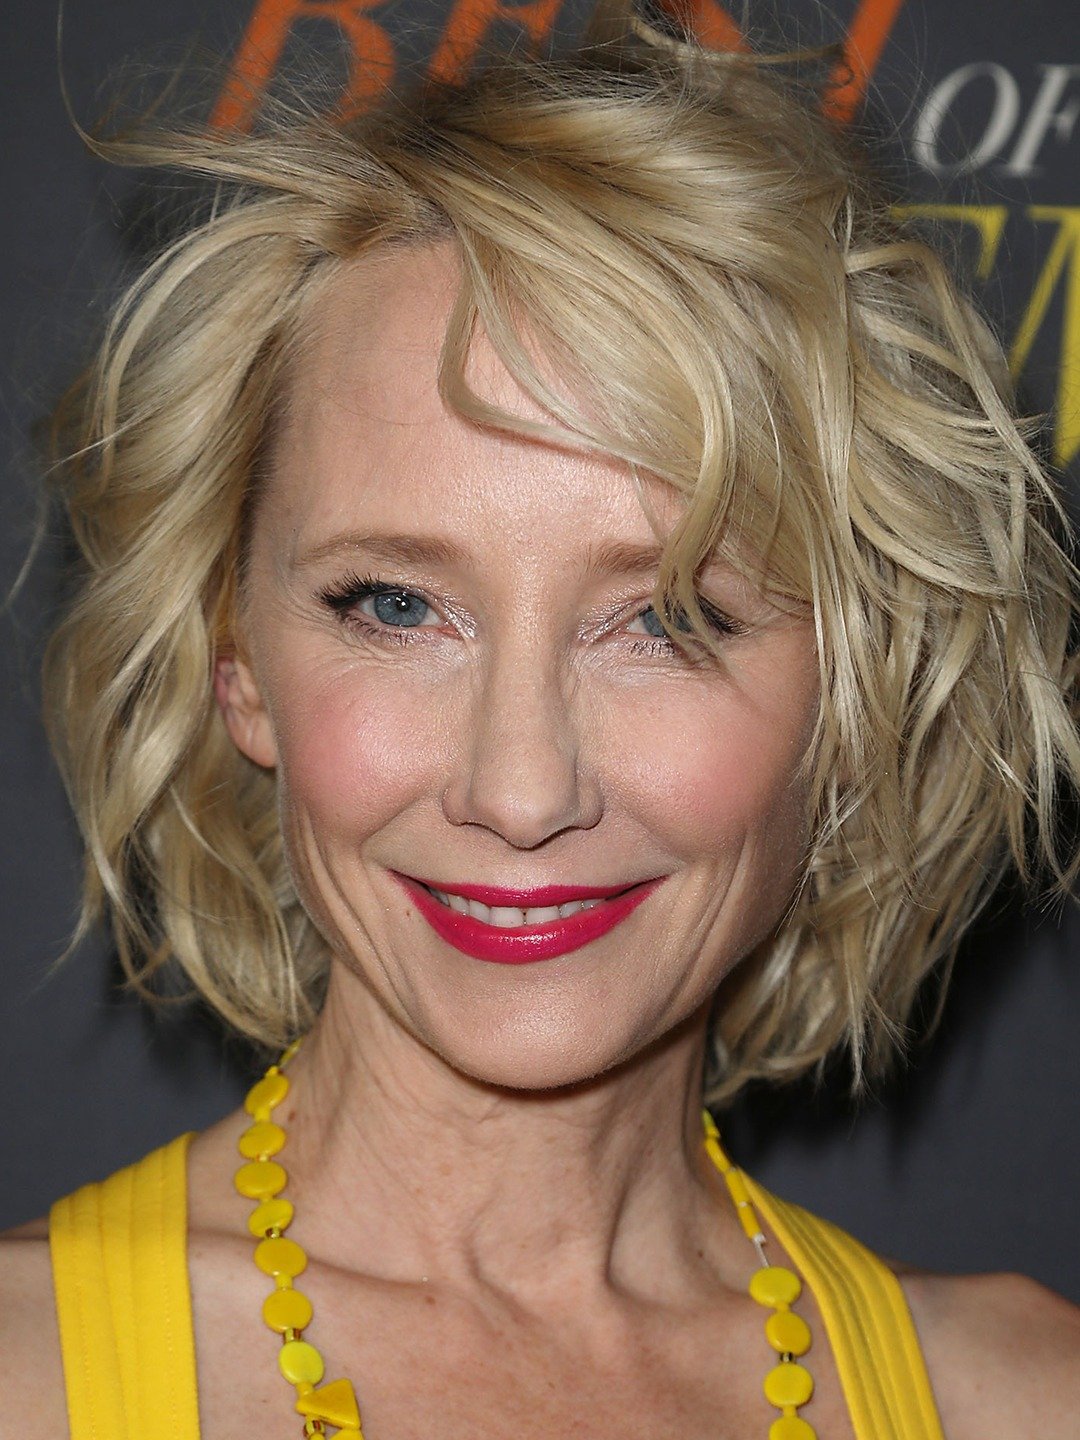 How tall is Anne Heche?